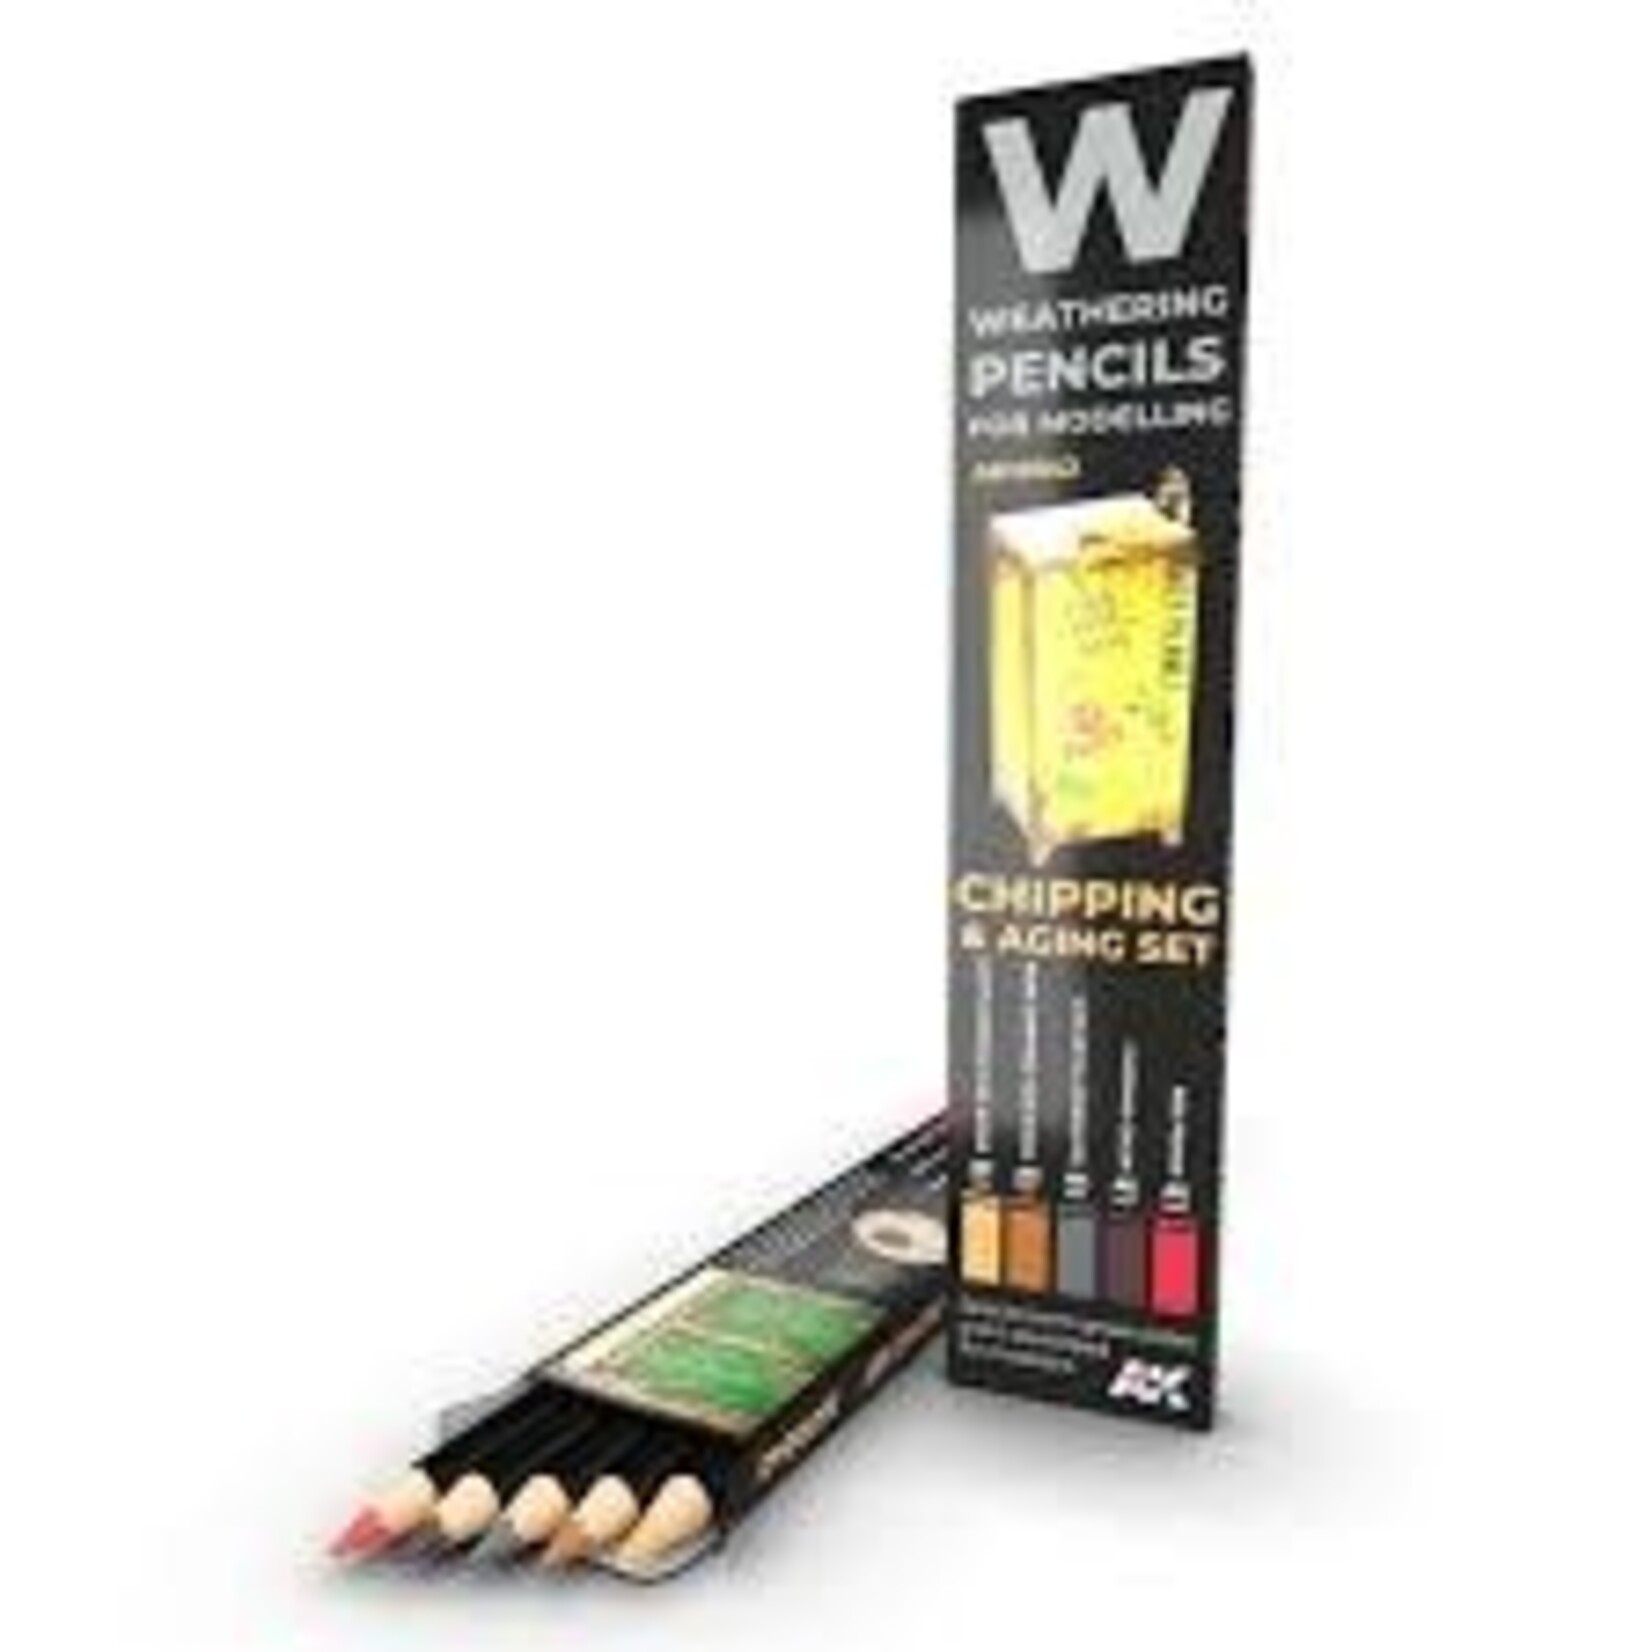 AK 10042 Weathering Pencils: Chipping & Aging Set (5 Colors)